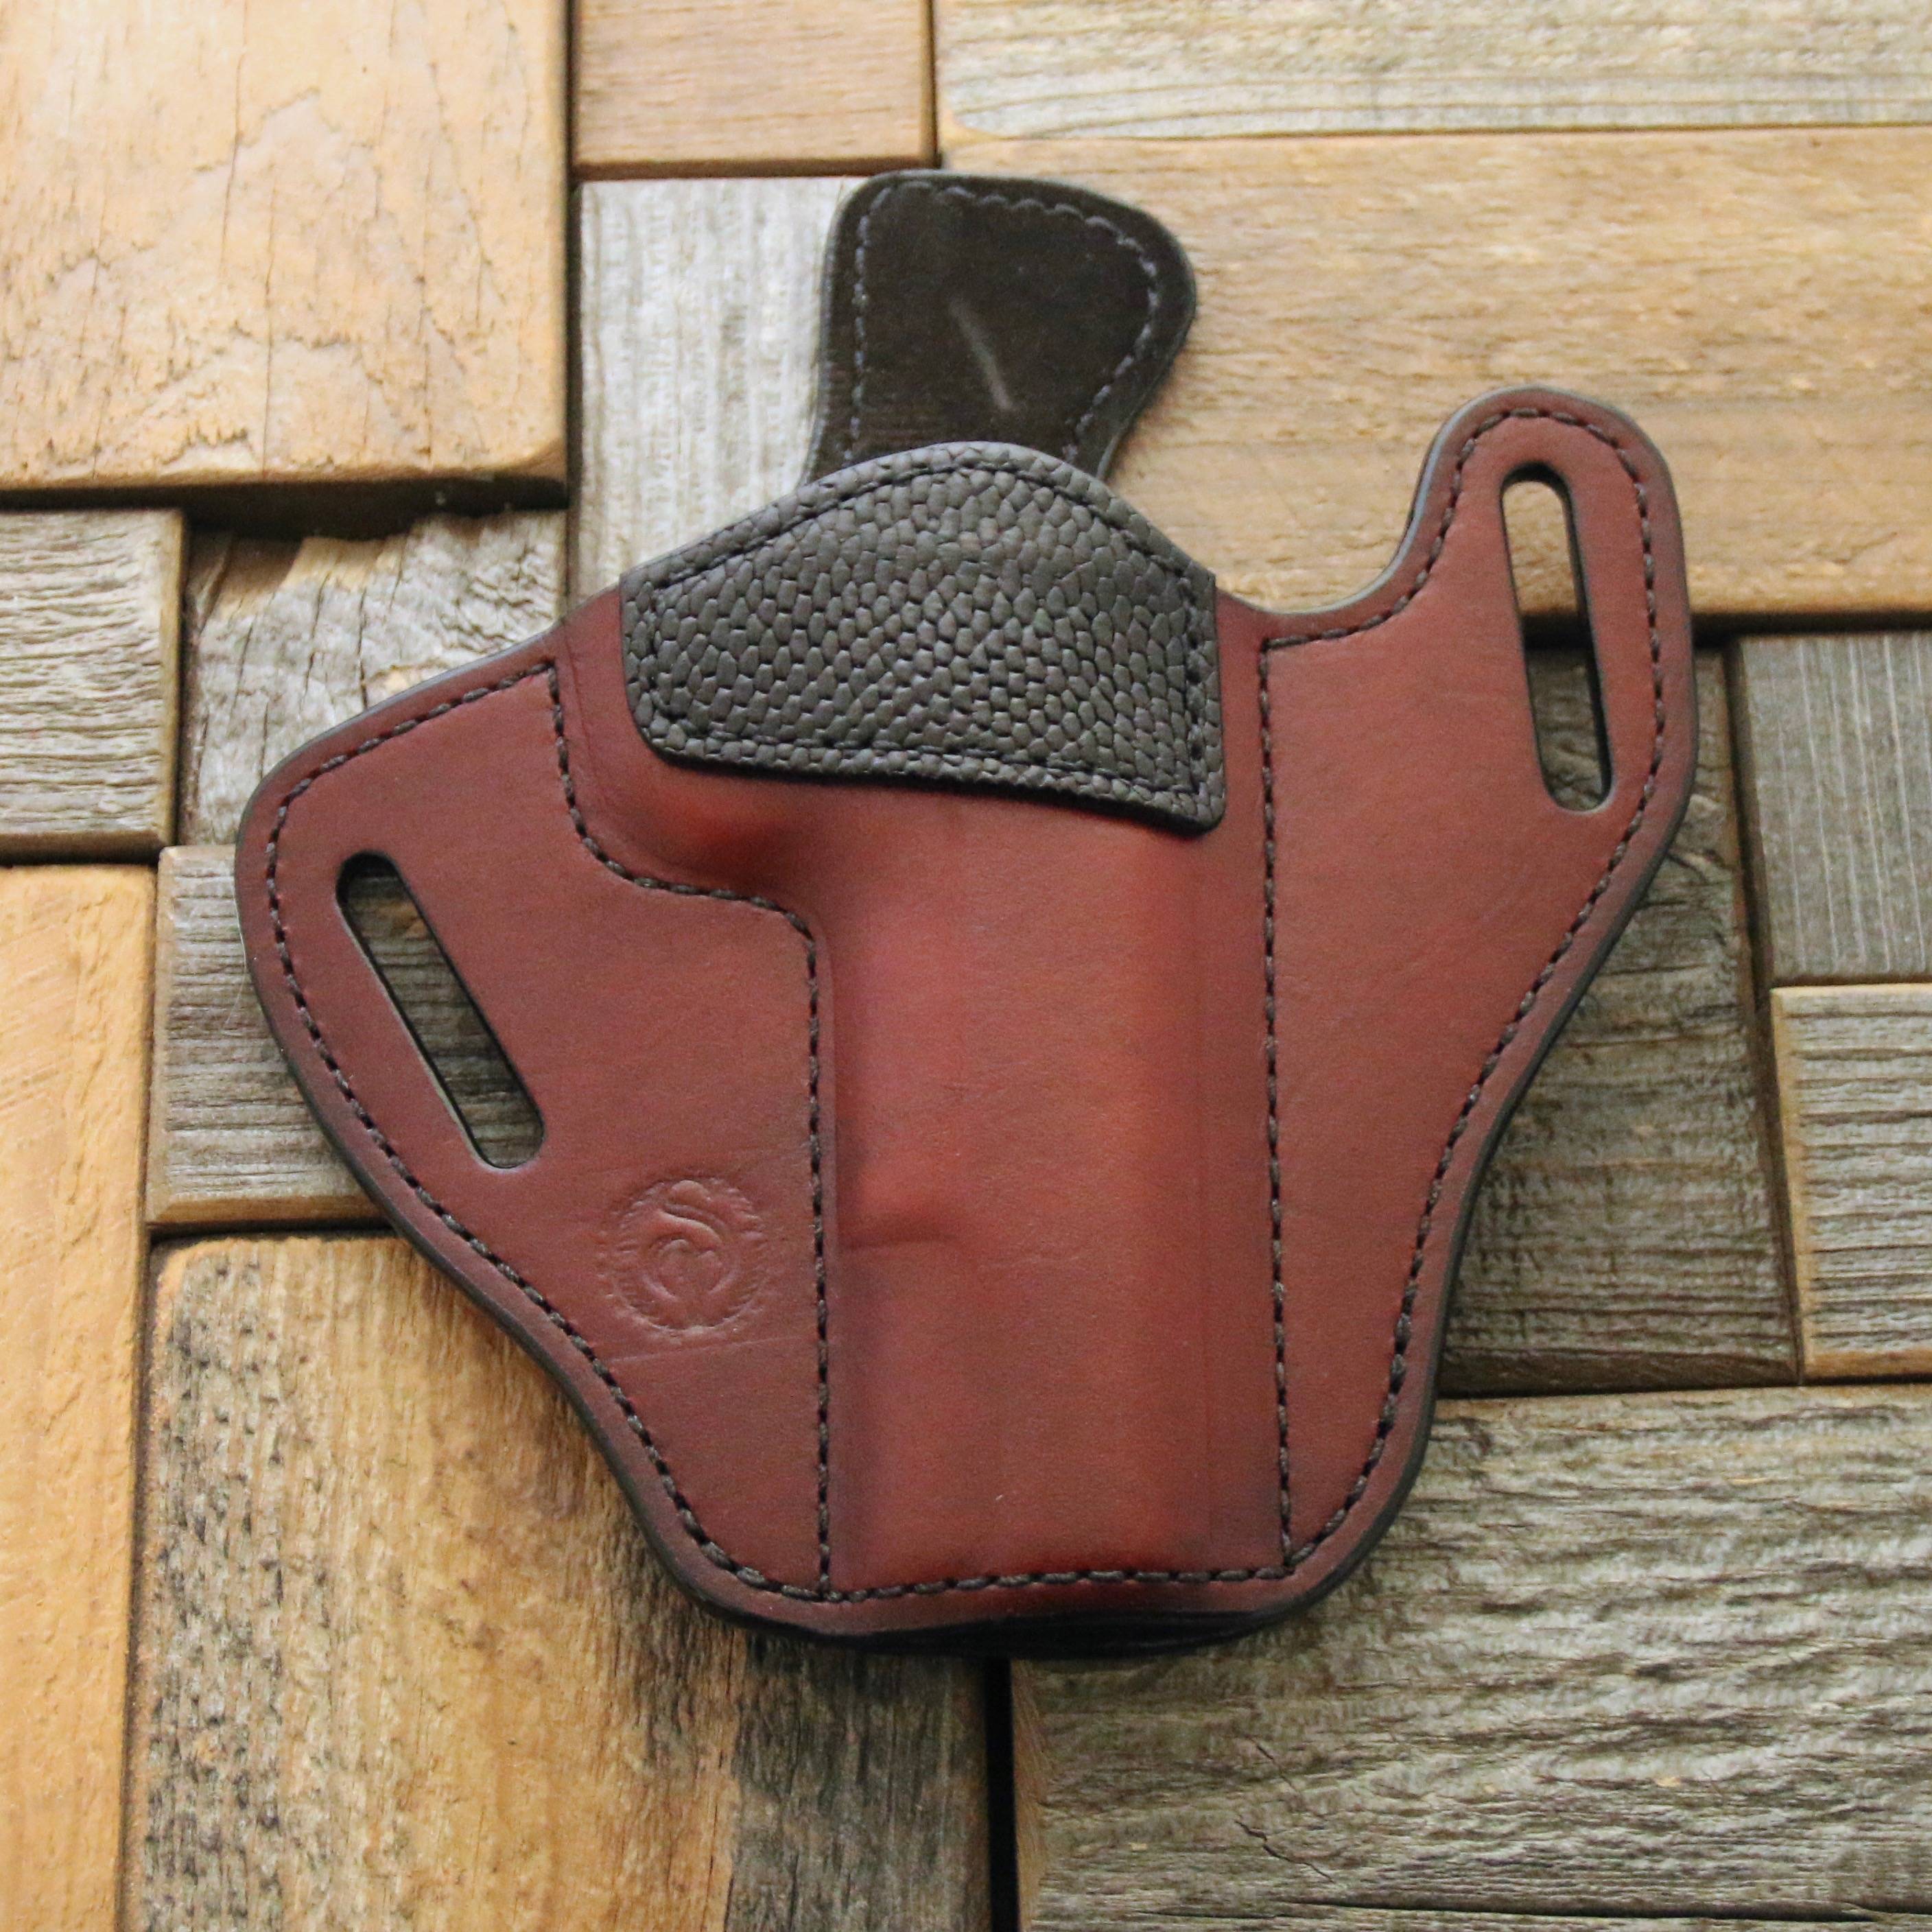 OWB holster for red dot sight.